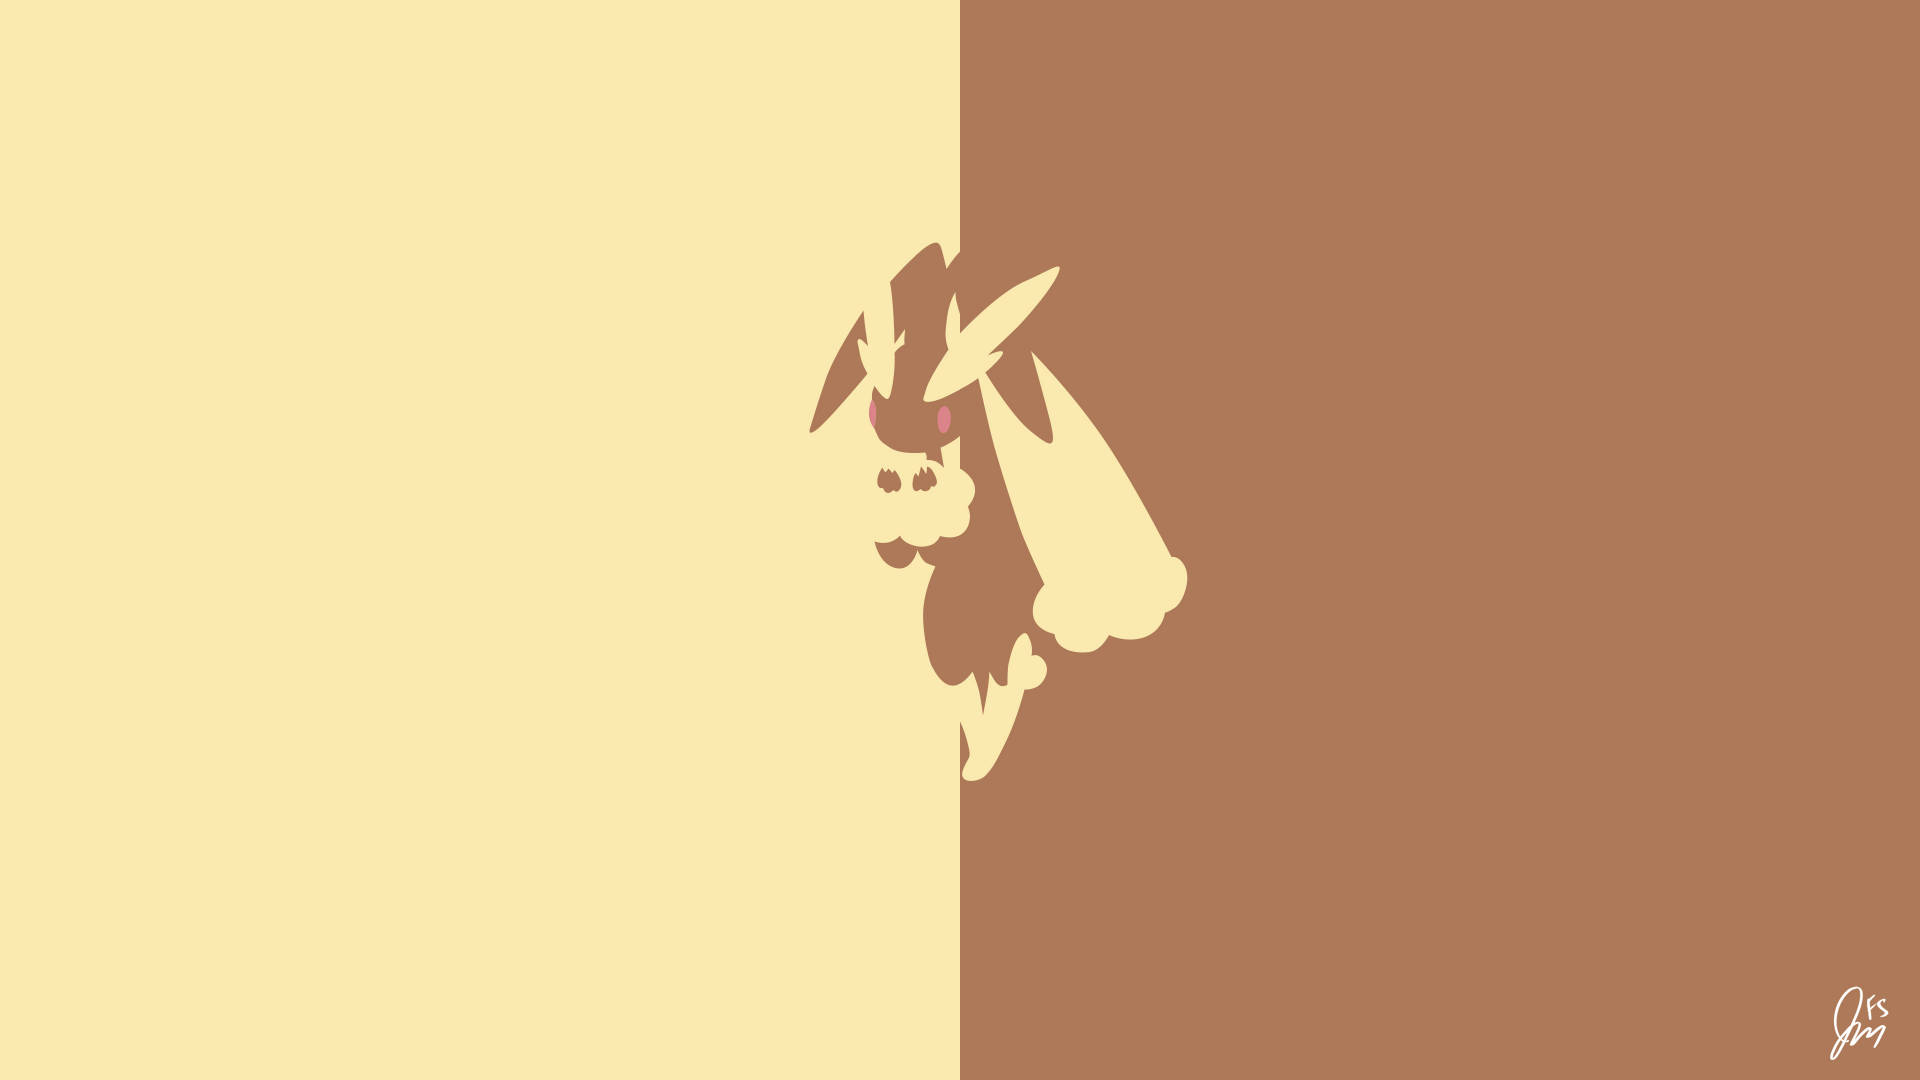 a silhouette of a dog in a brown and yellow color Wallpaper